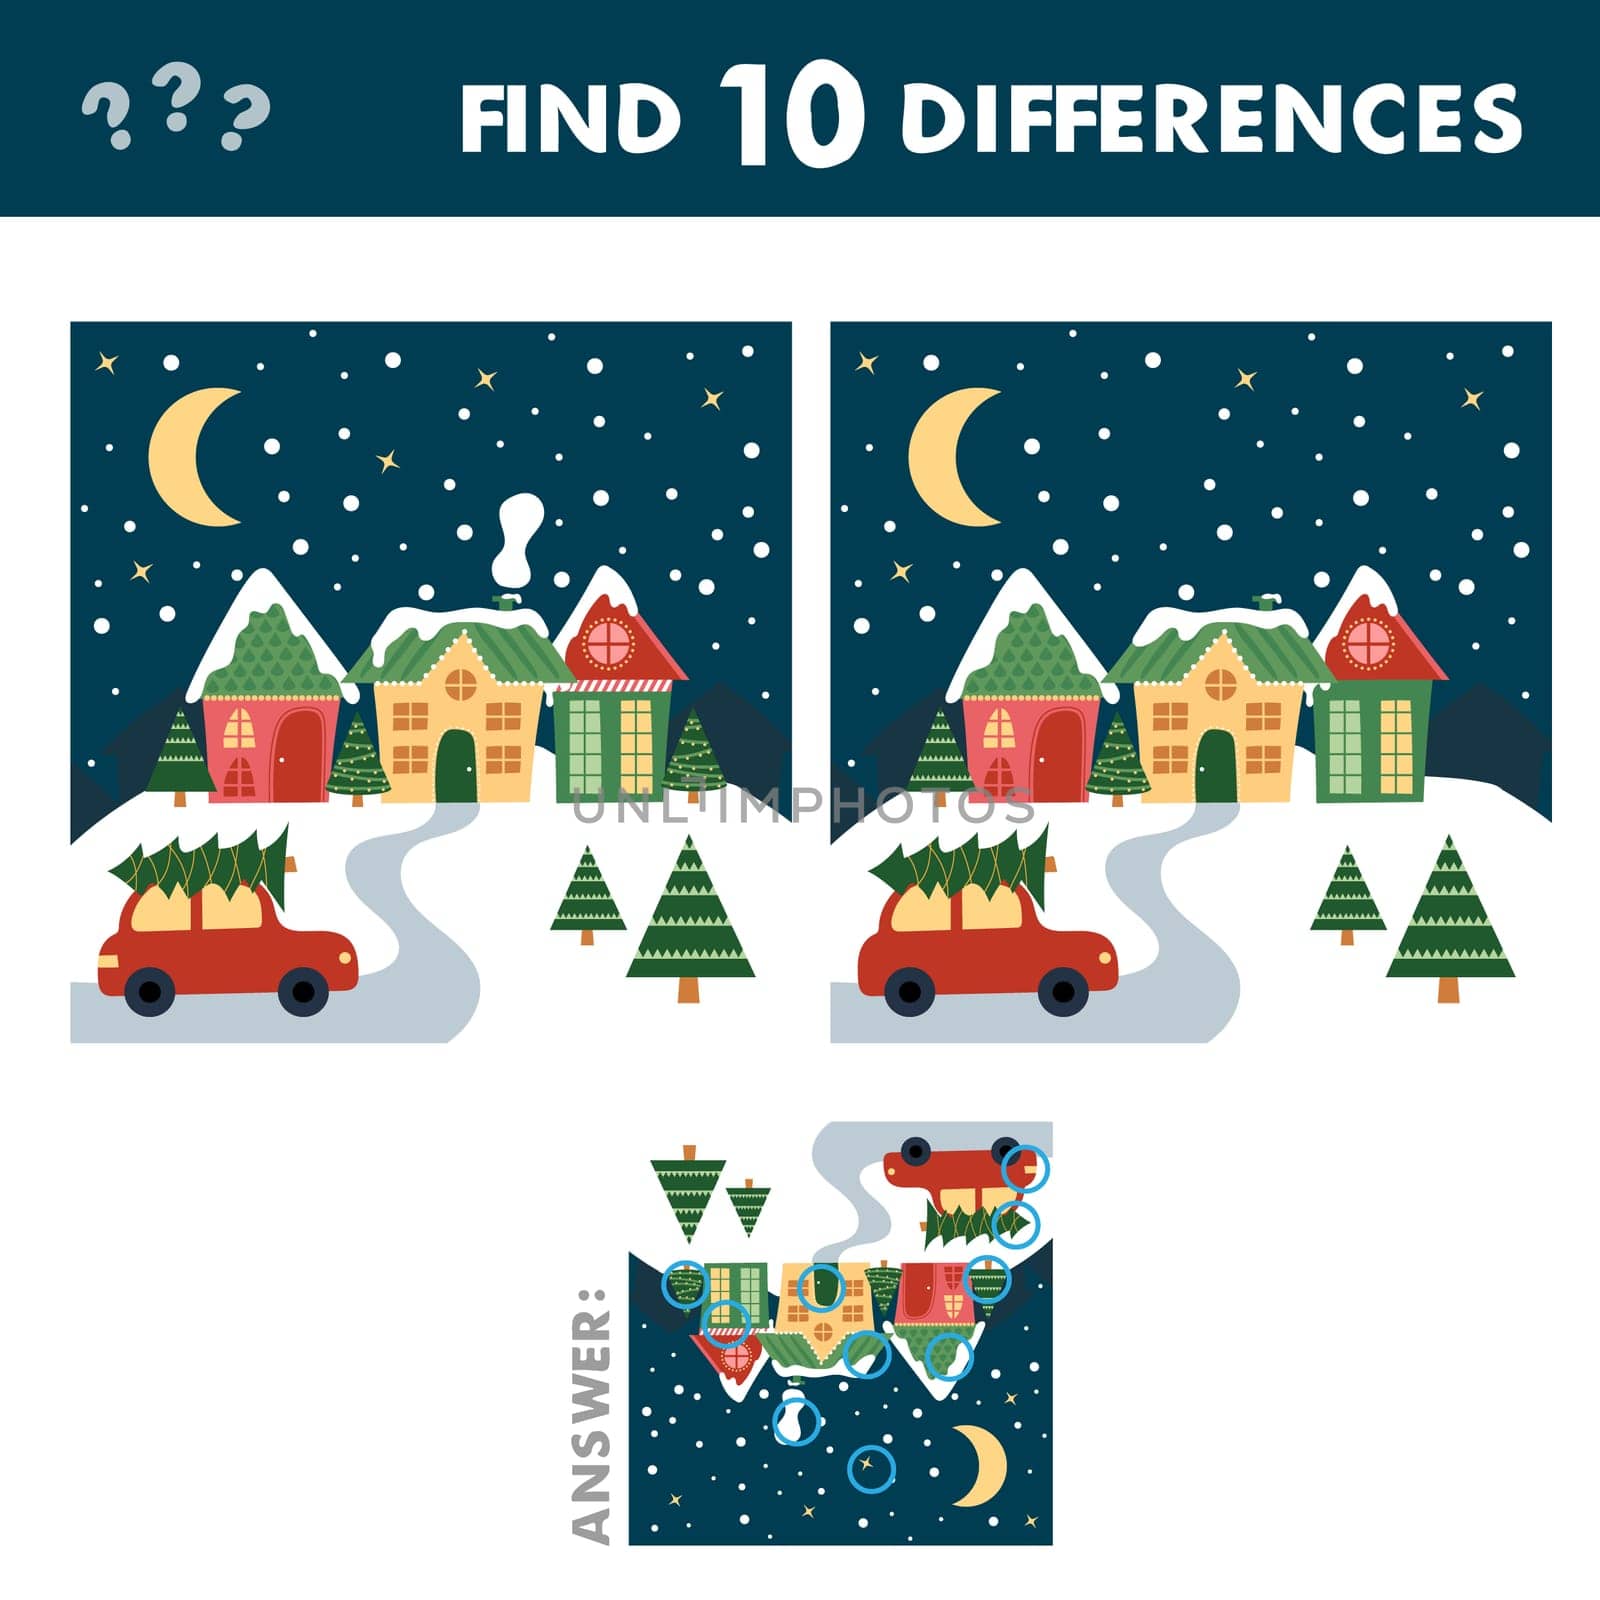 Kids game find ten differences. Vector cartoon Christmas houses and car. Educational children riddle leisure activity with answer